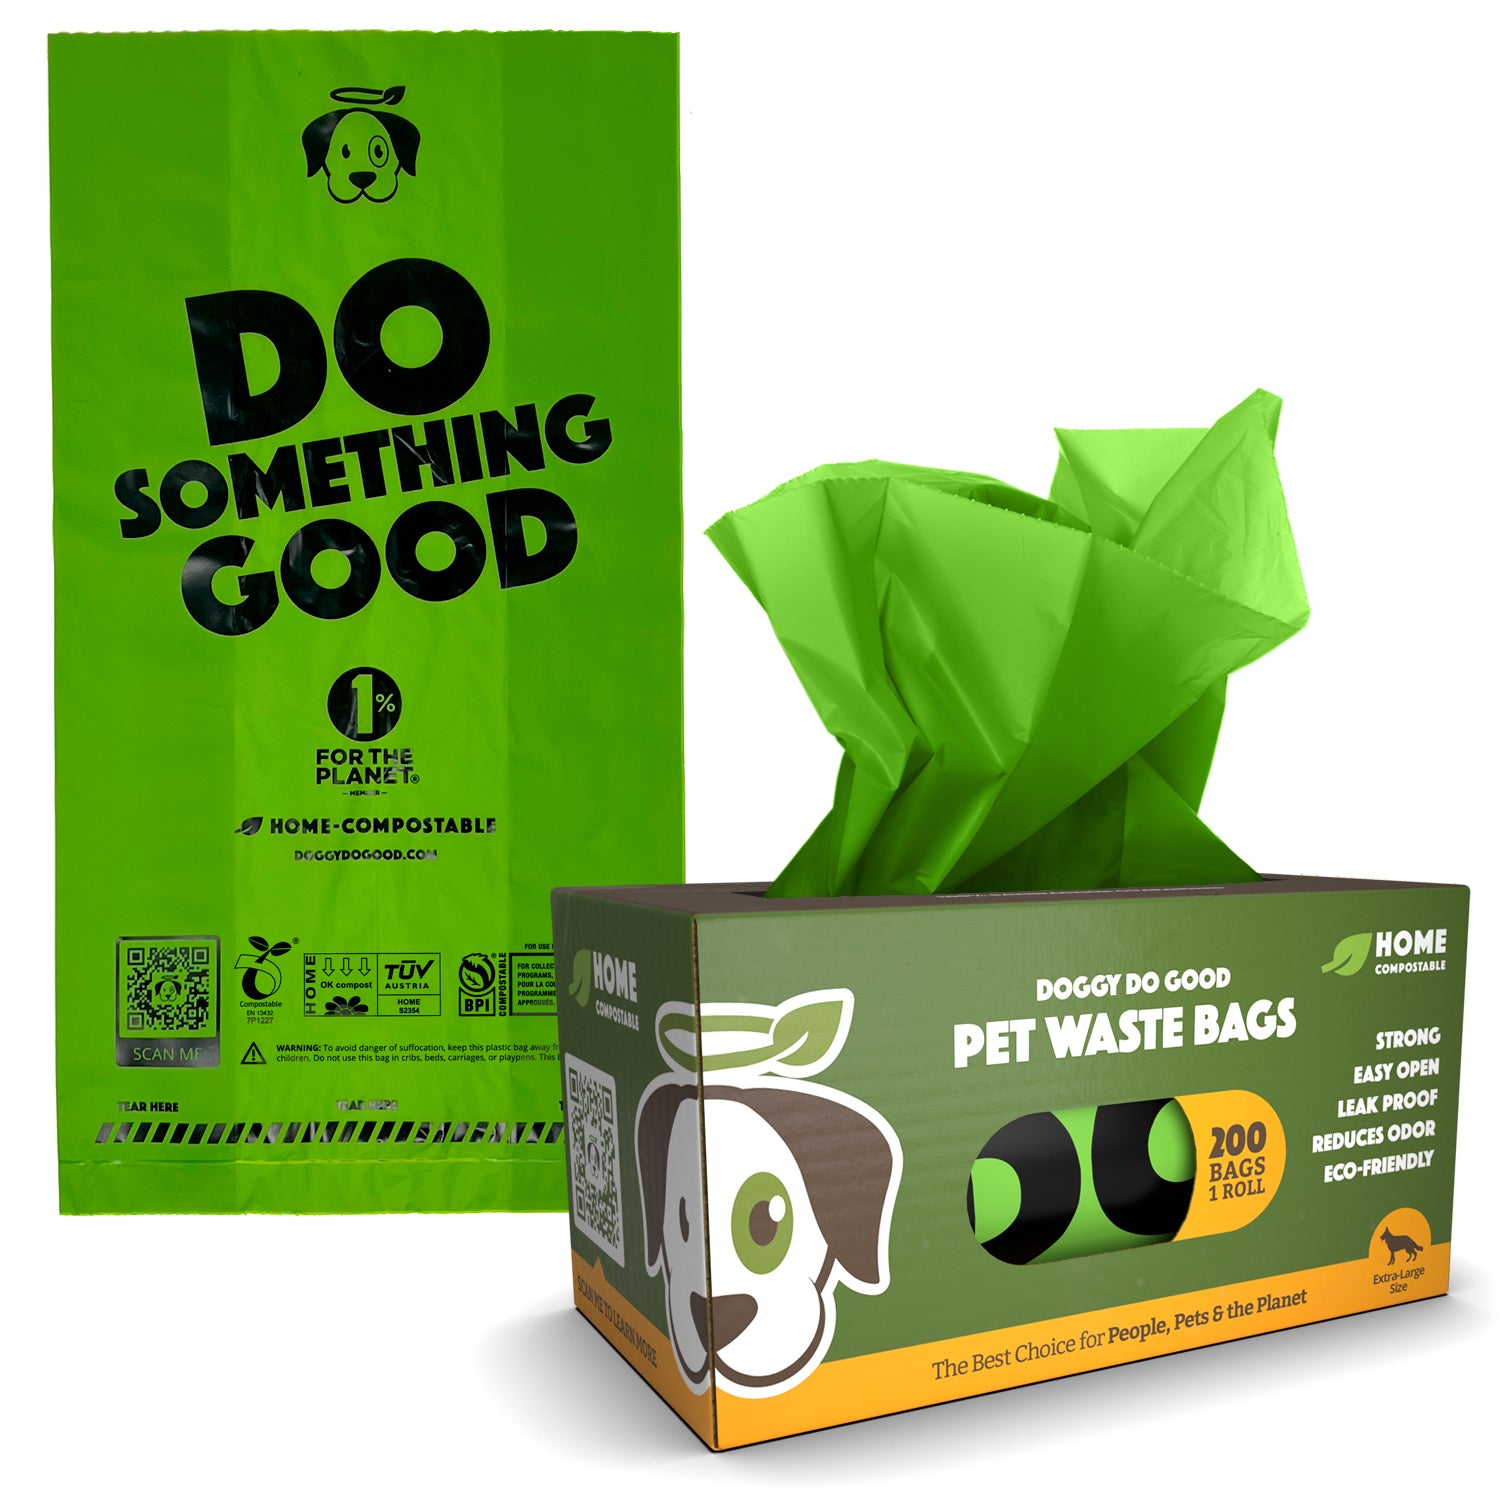 Compostable Pet Waste Bags - 200 Bags